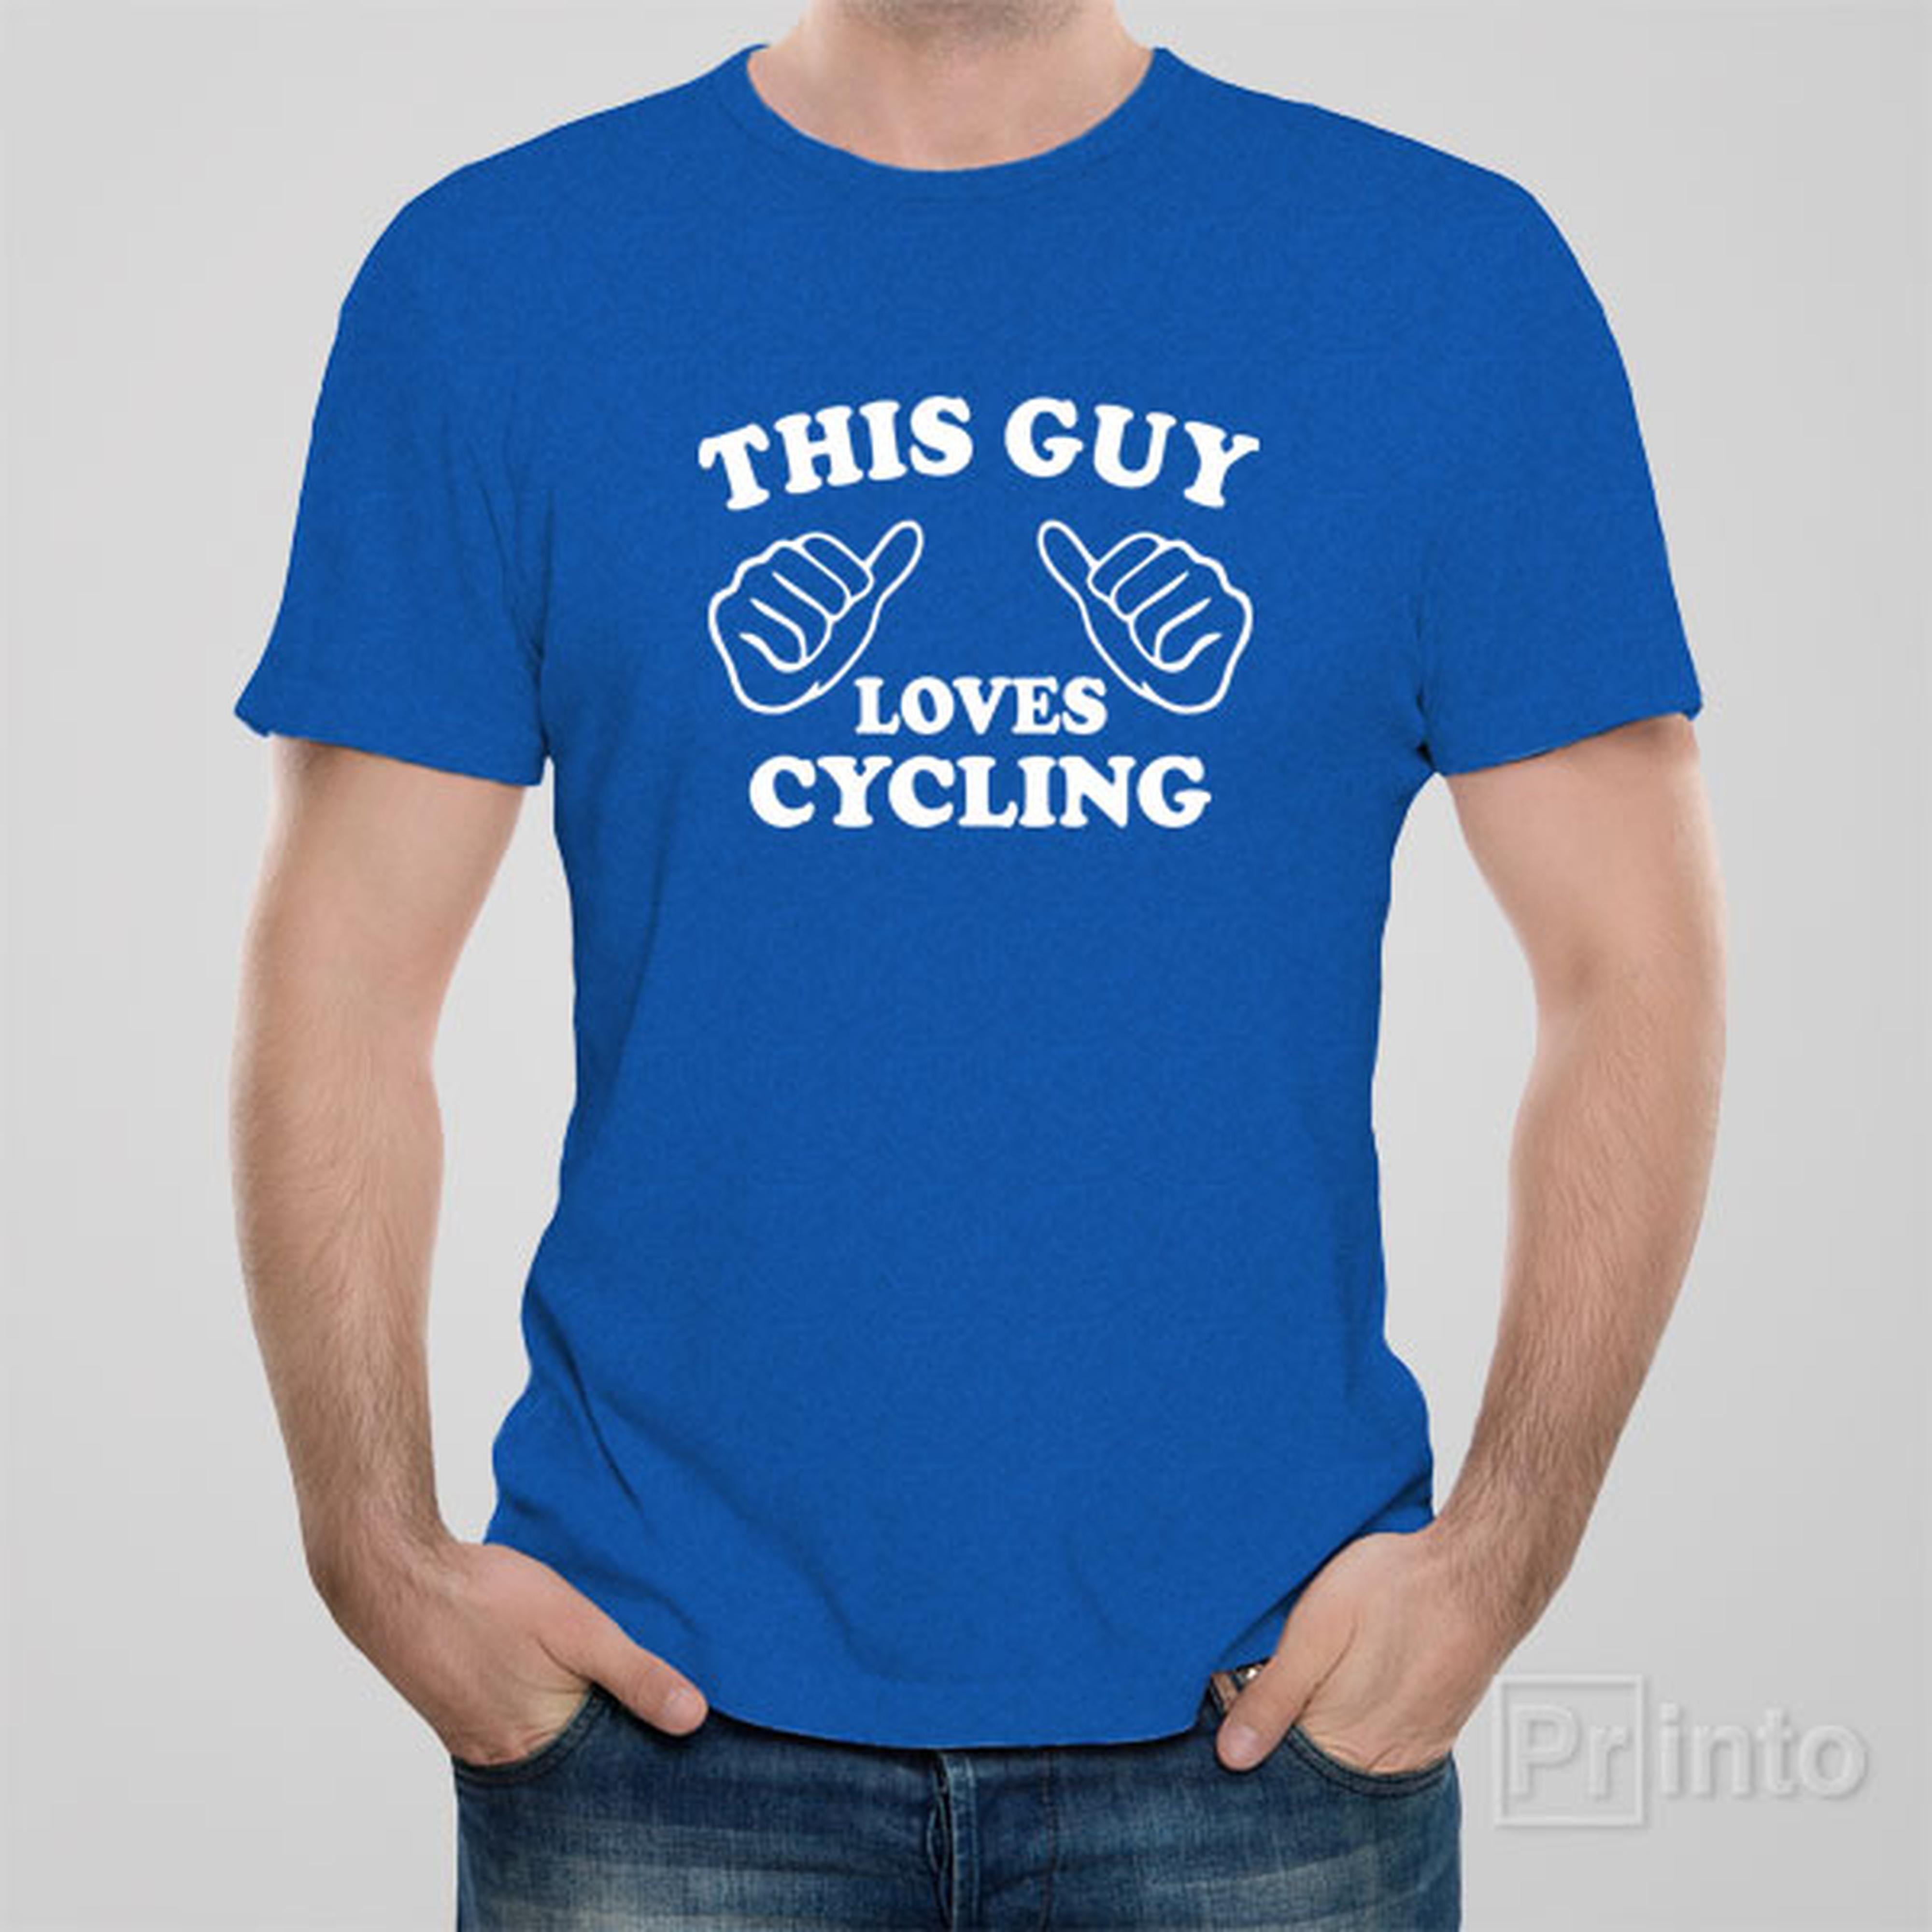 this-guy-loves-cycling-t-shirt